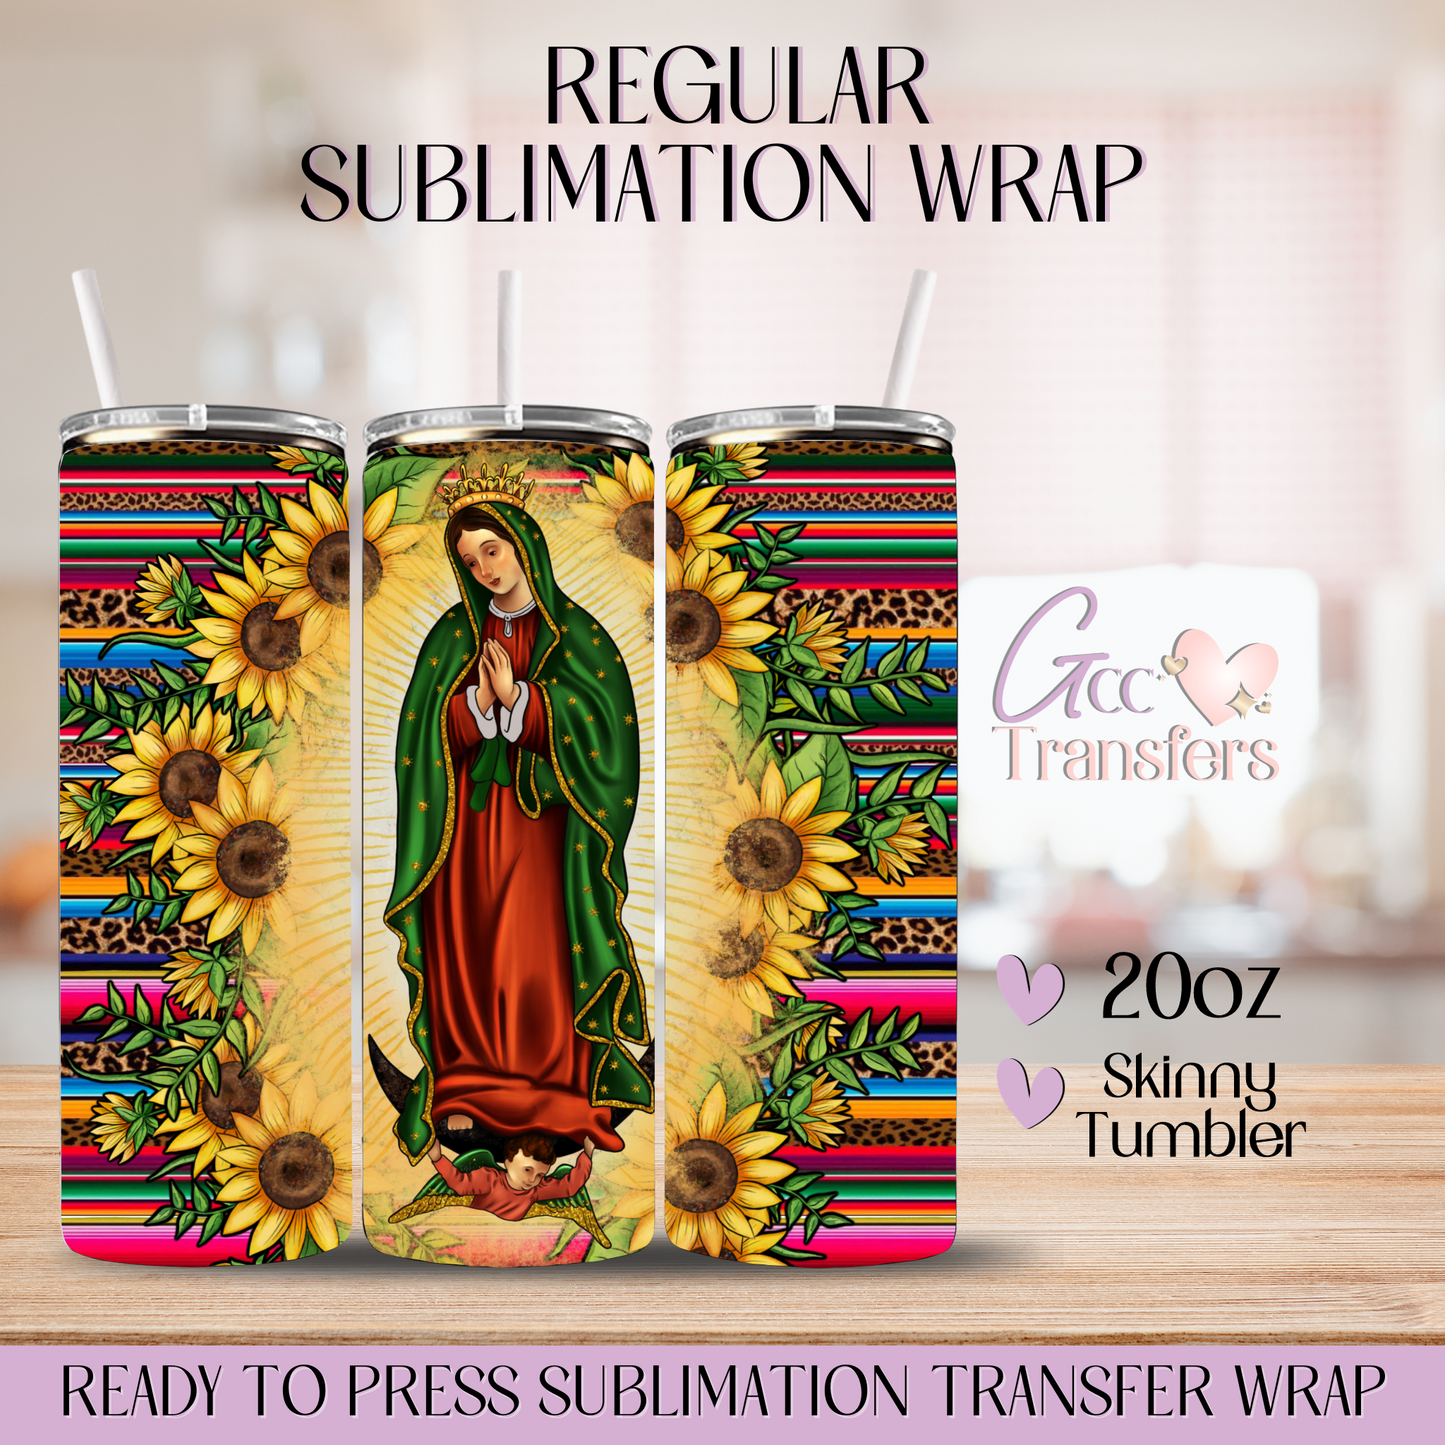 Our Lady of Guadalupe Sunflower - 20oz Regular Sublimation Wrap